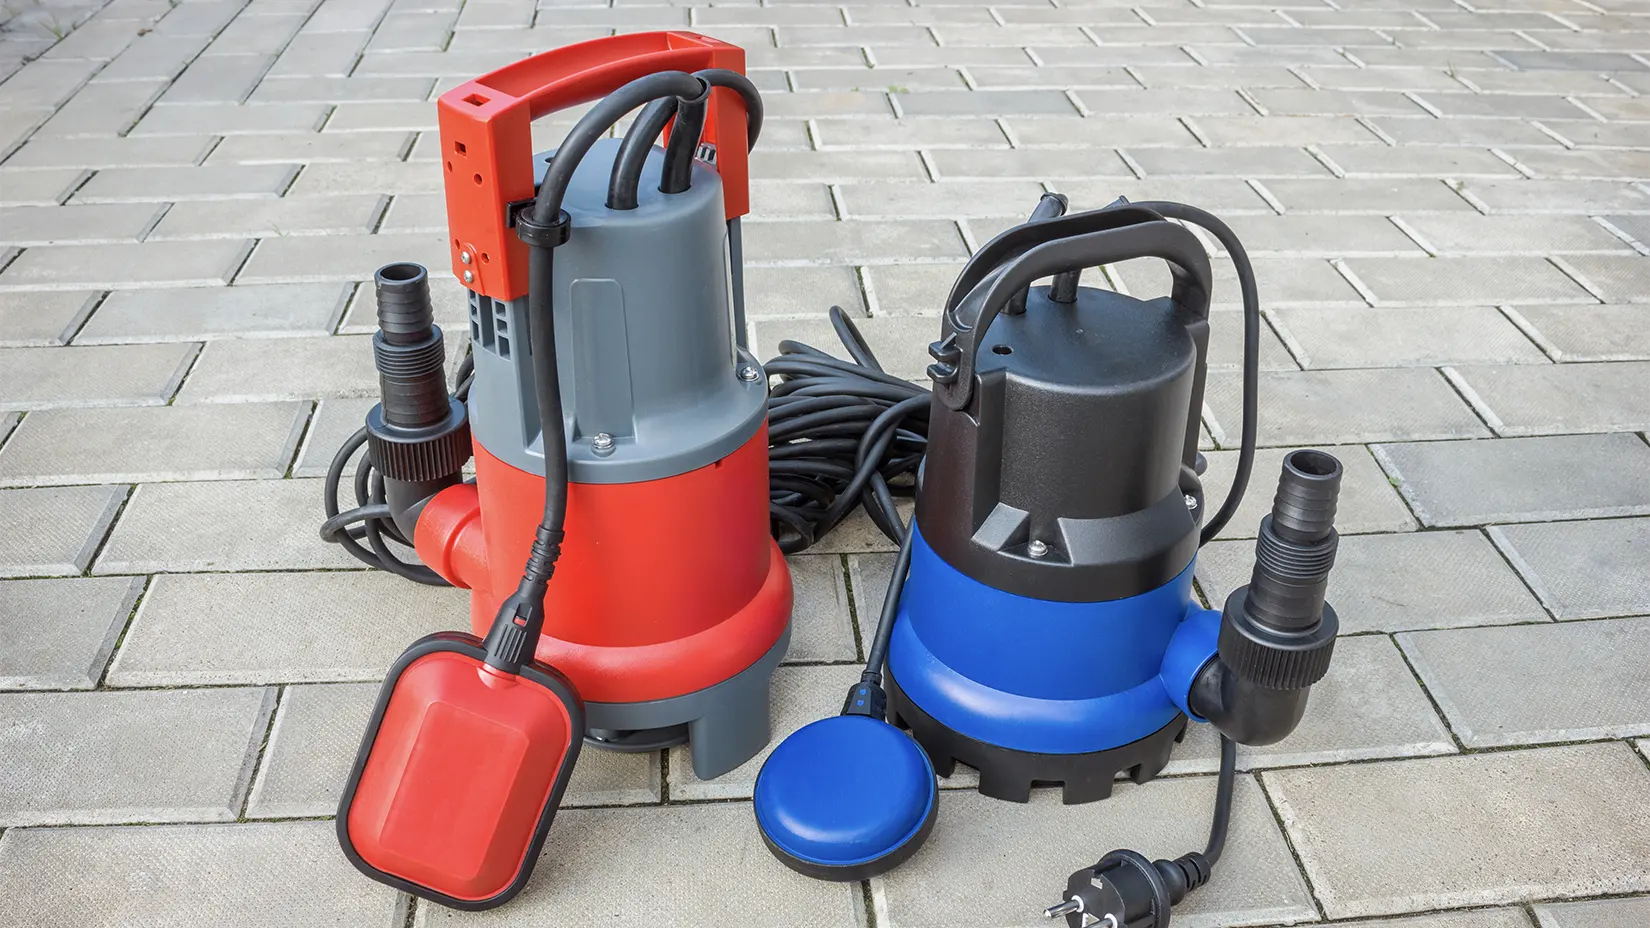 A red and blue sump pump sit next to each other on a concrete pavement.